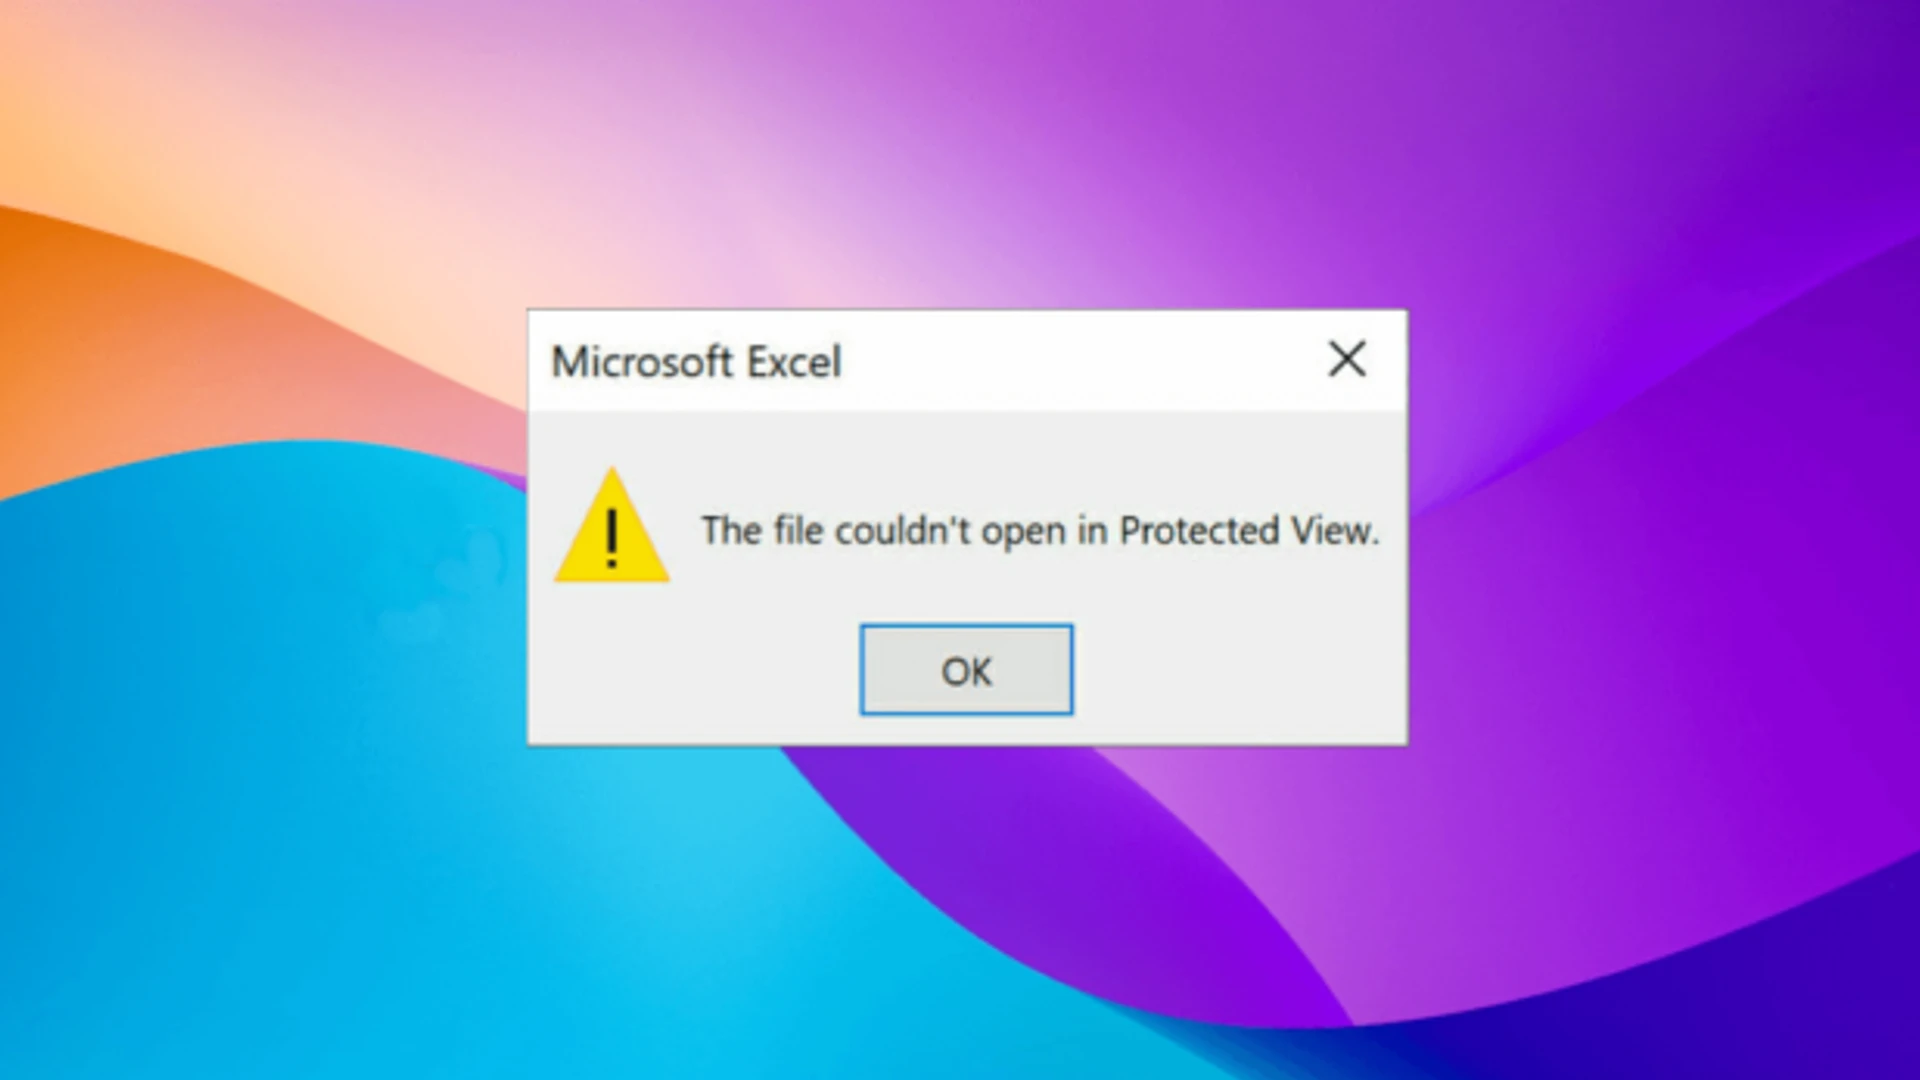 The Excel File couldn’t open in Protected View.